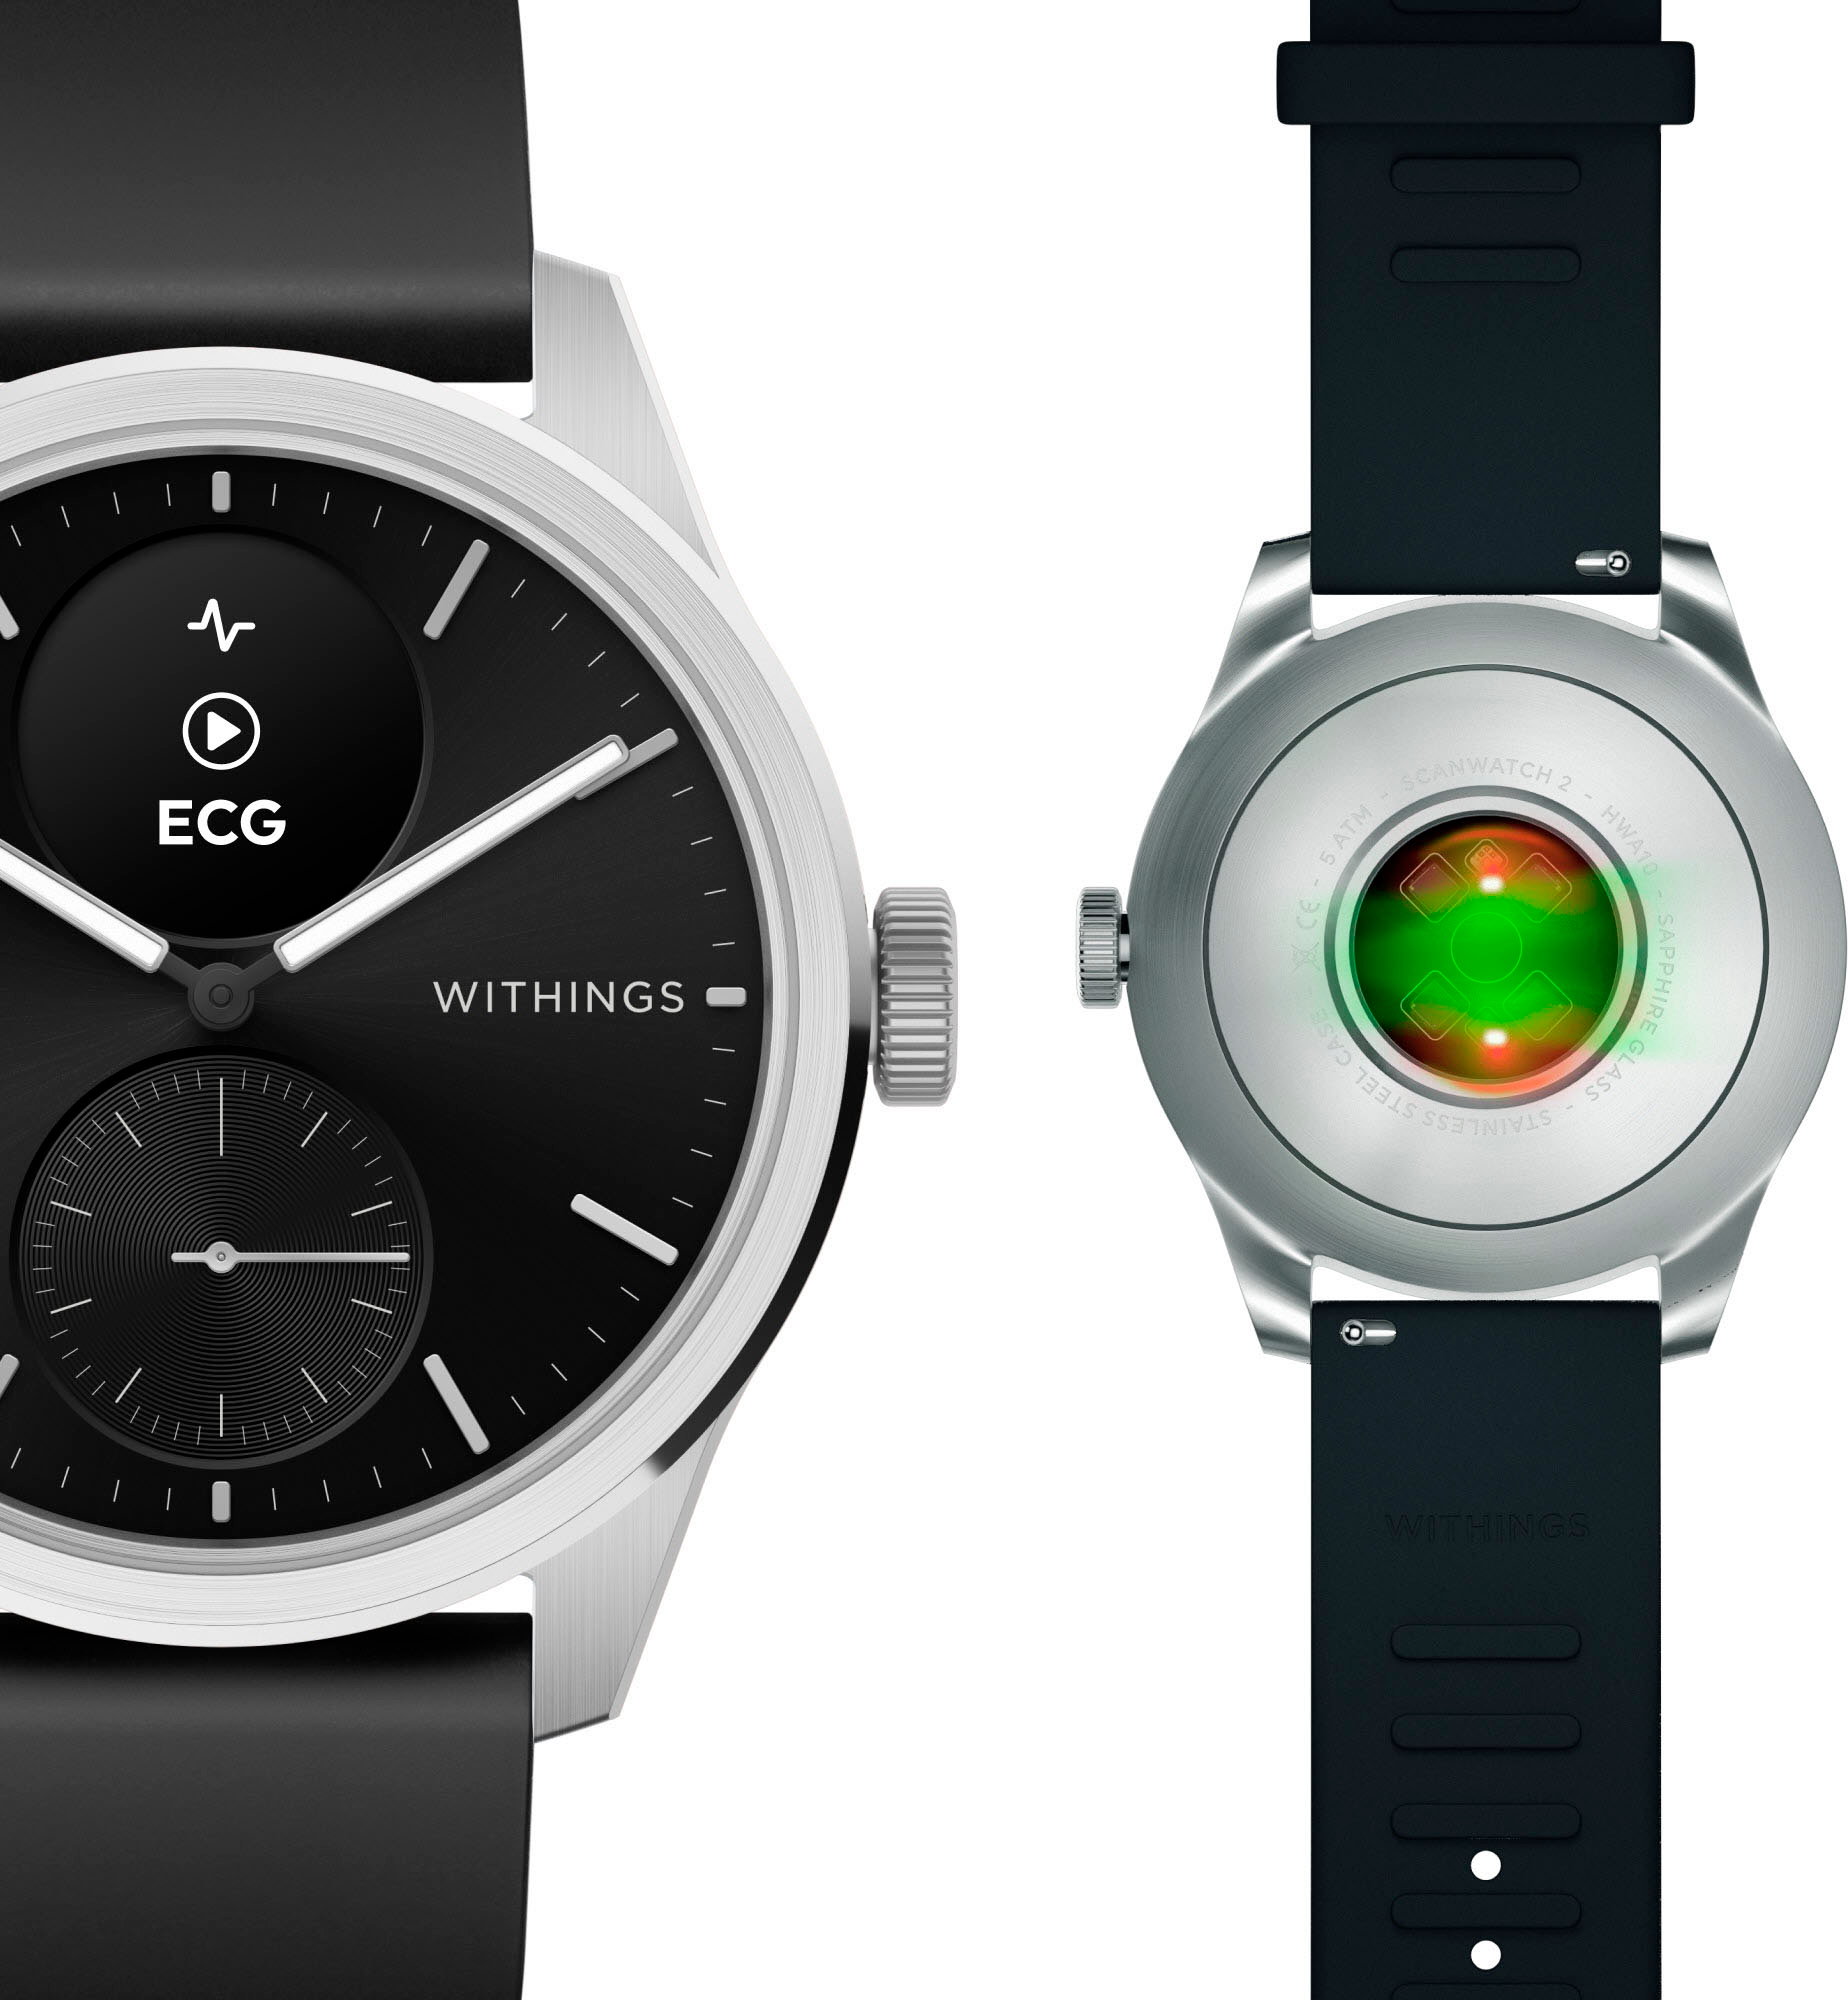 Withings ScanWatch 2 - Heart Health Hybrid Smartwatch, 42mm - Black